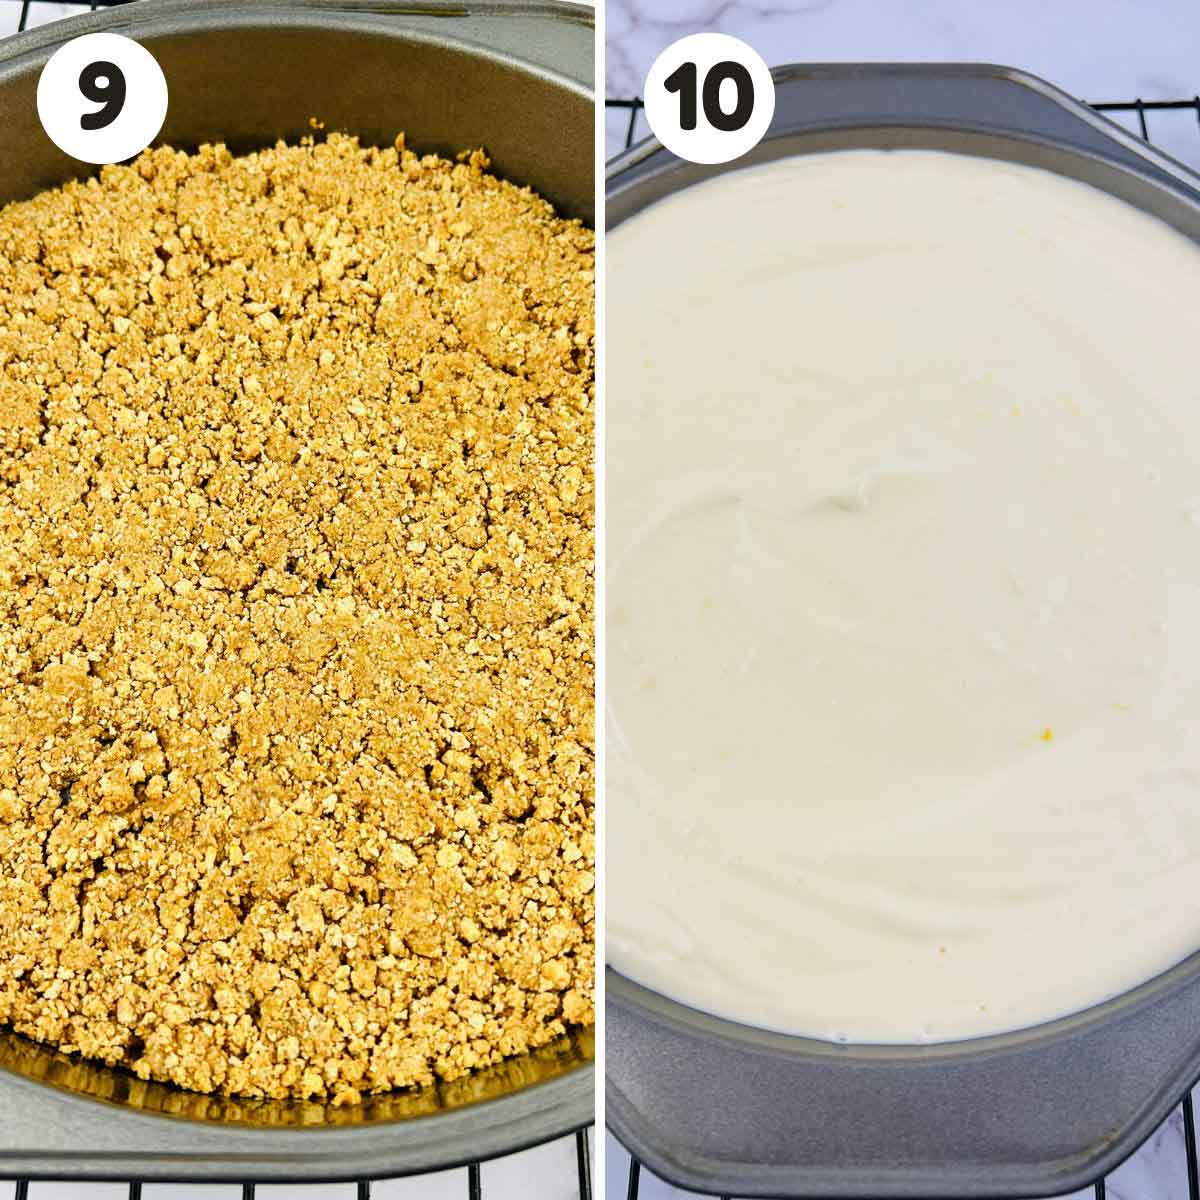 Steps to bake the cheesecake.